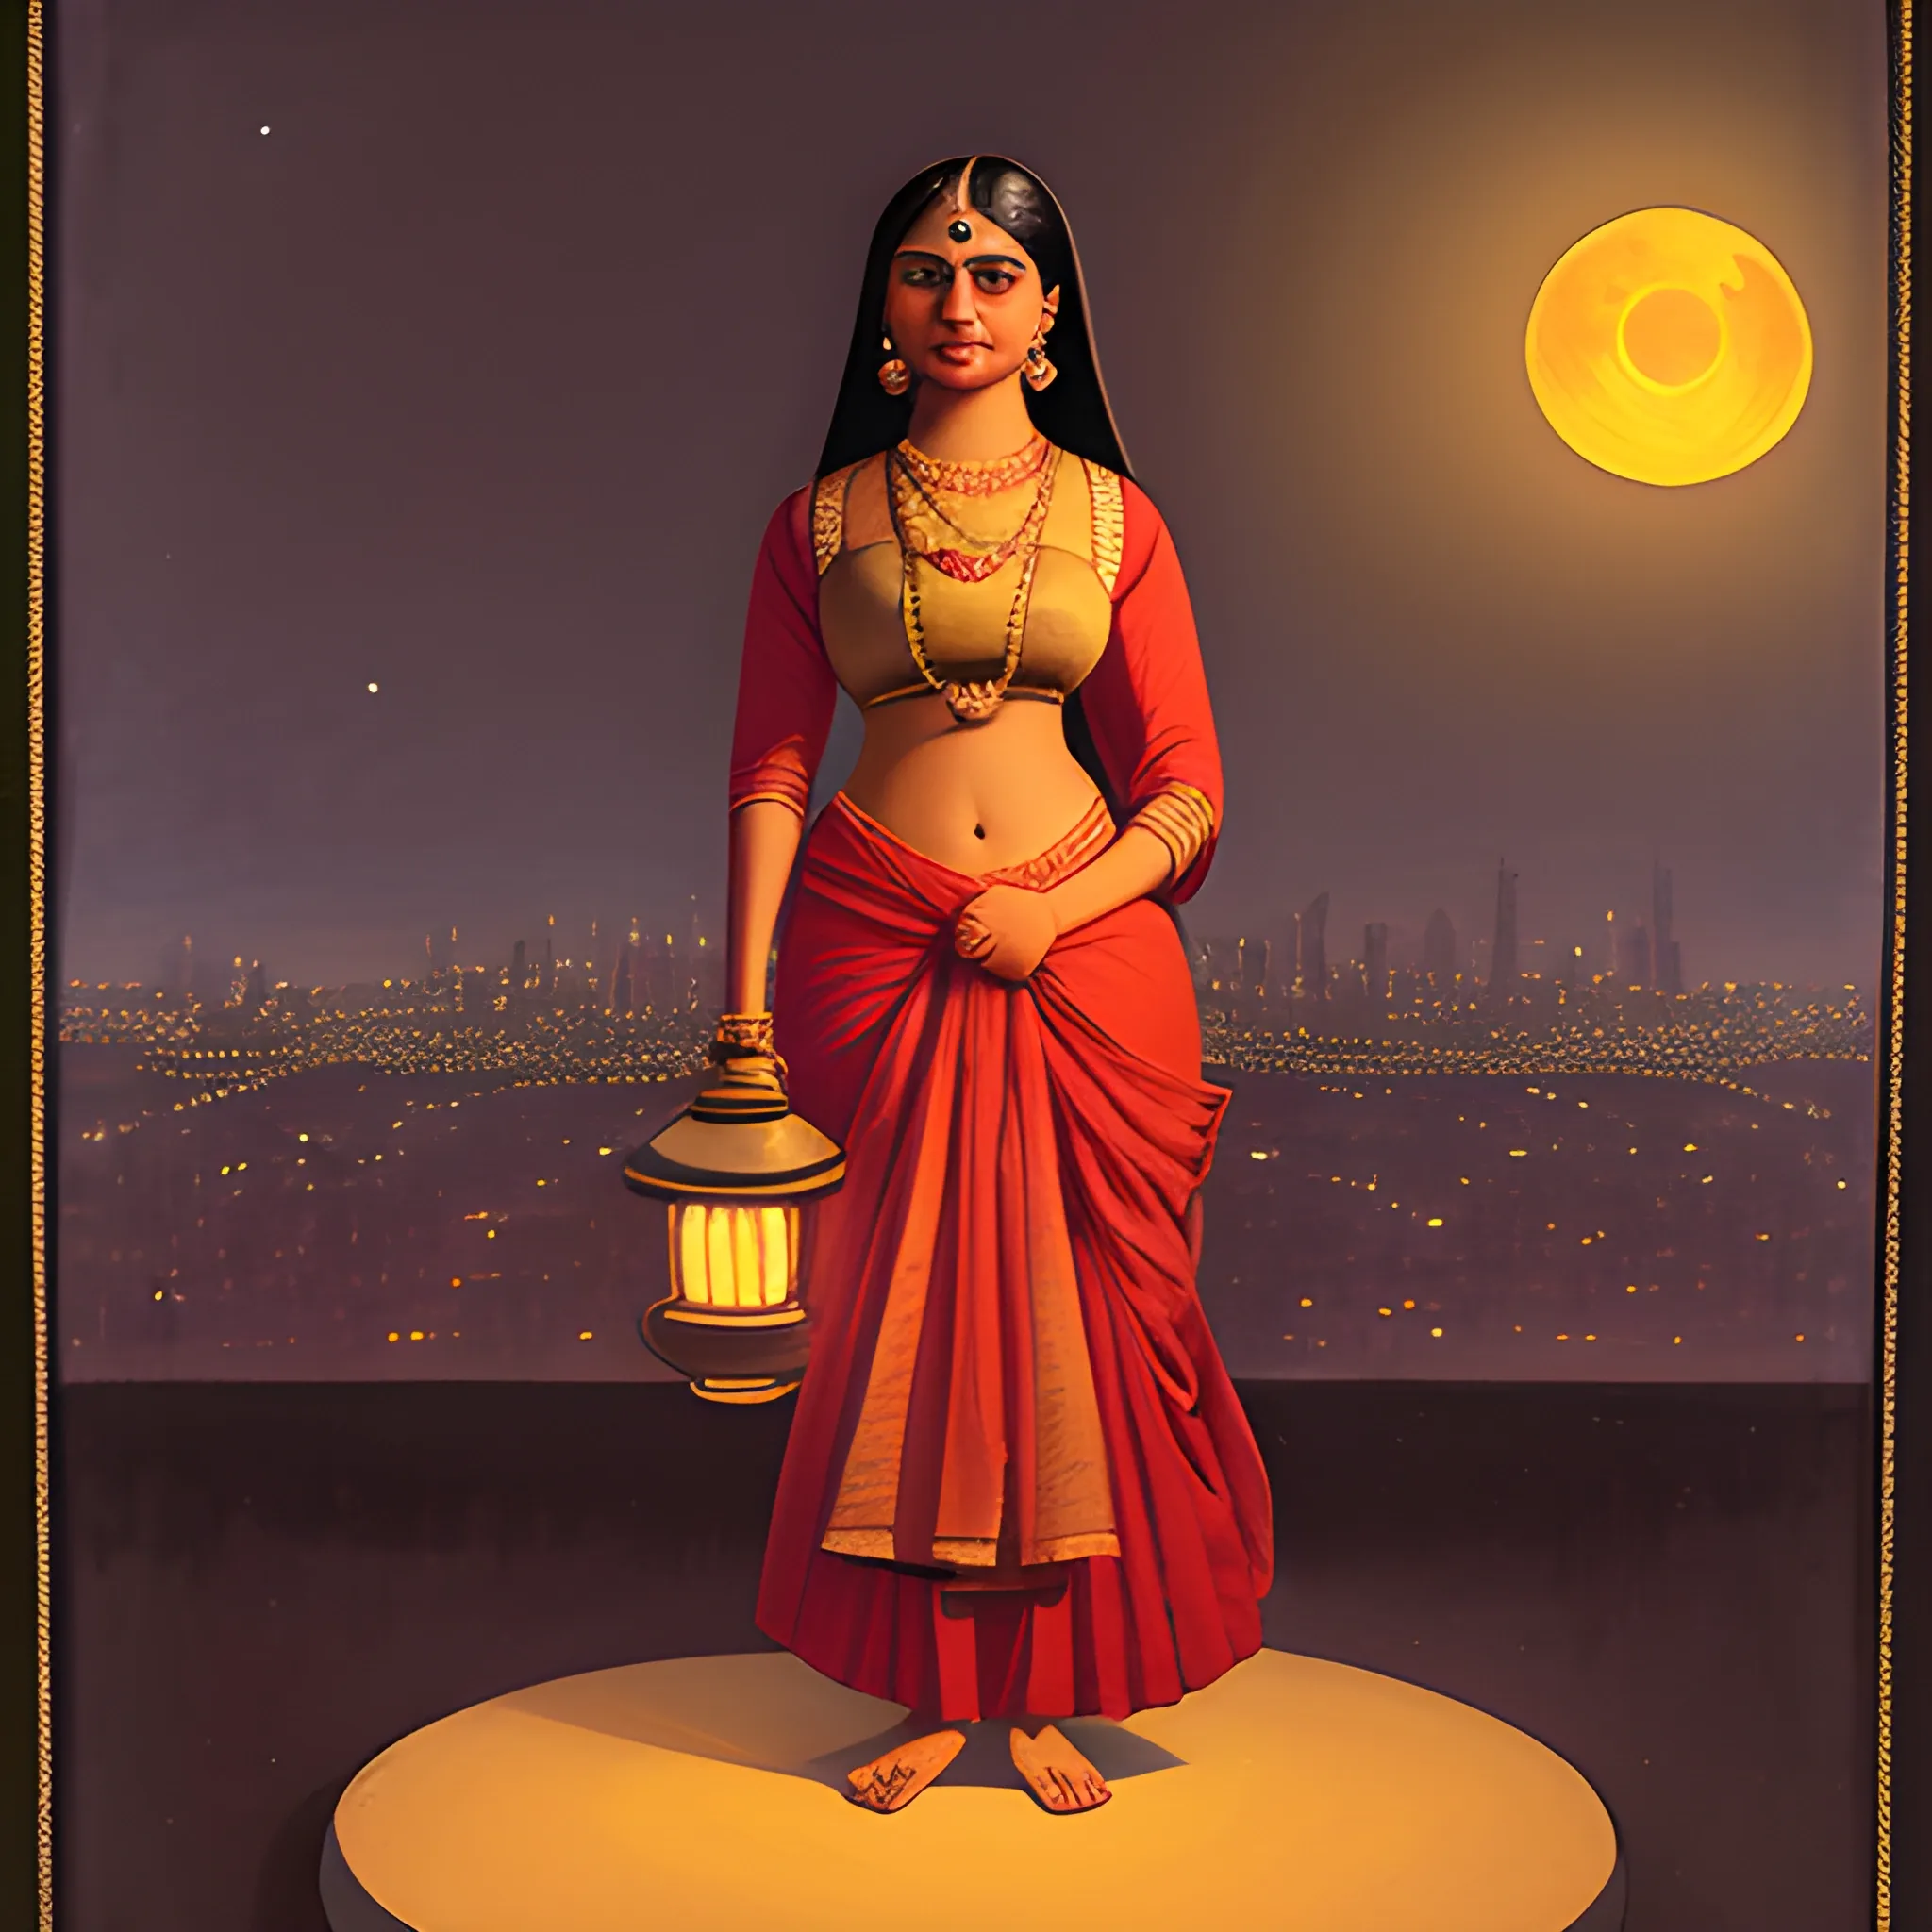 woman with lantern standing in front of the moonlit city, in the style of Raja Ravi Verma